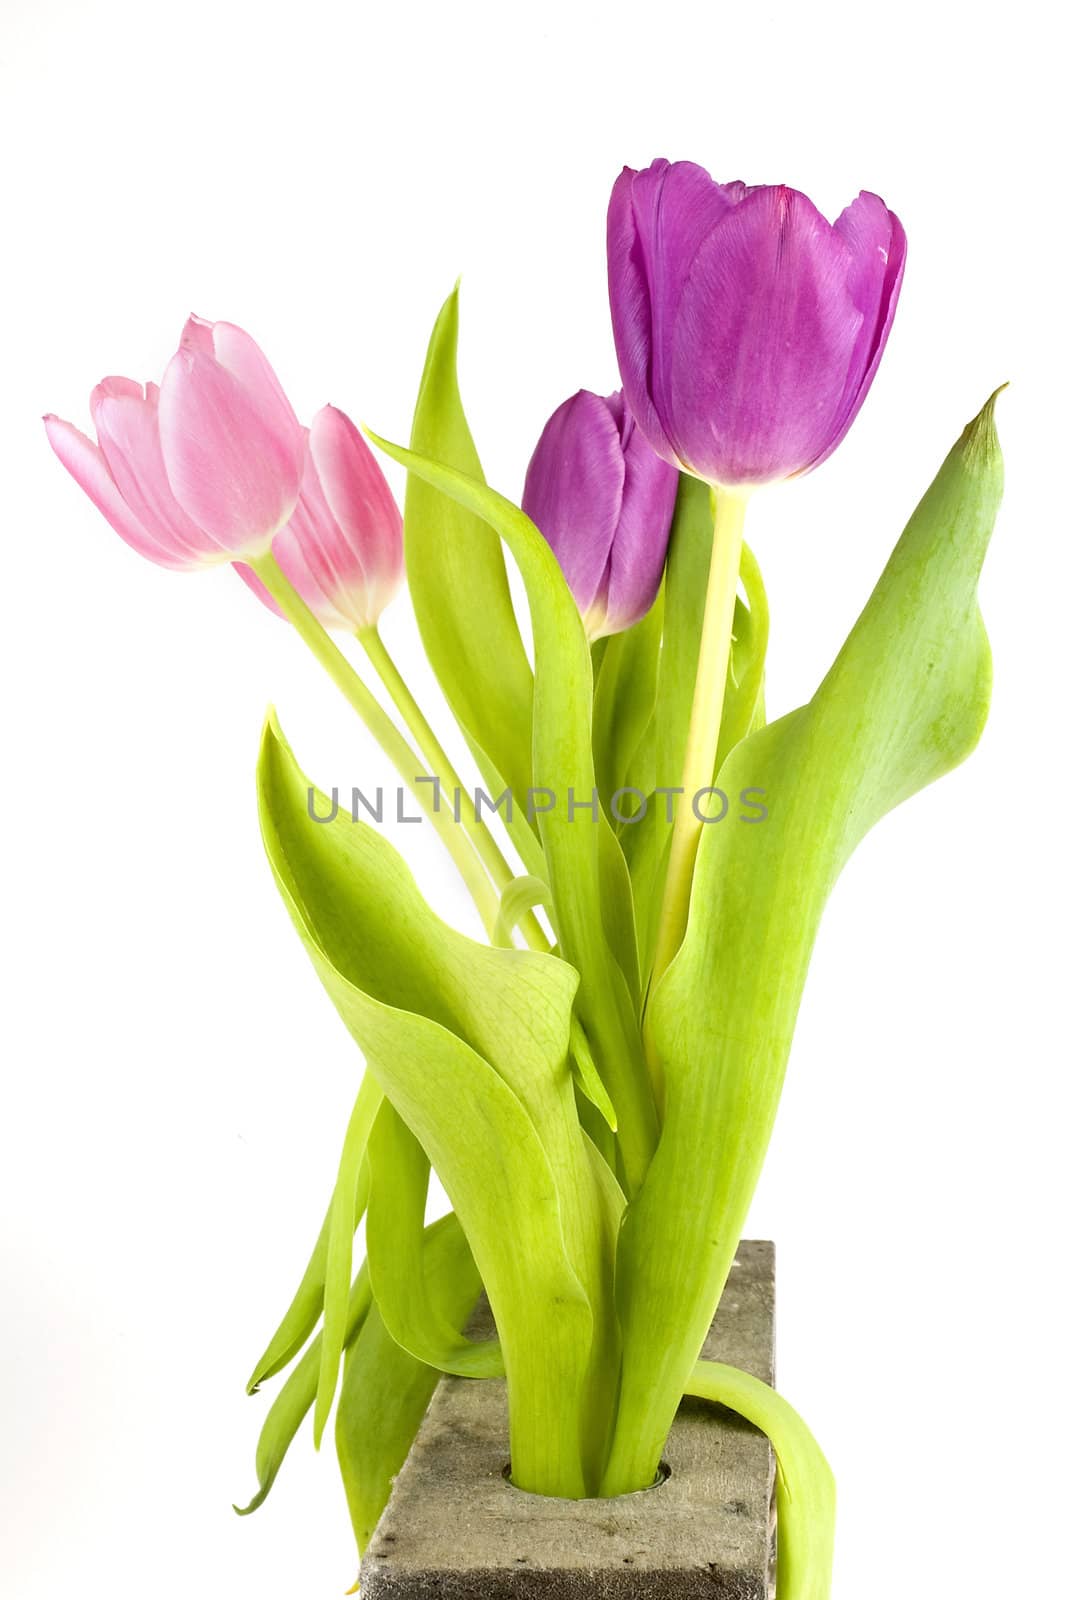 four tulips in a row, 